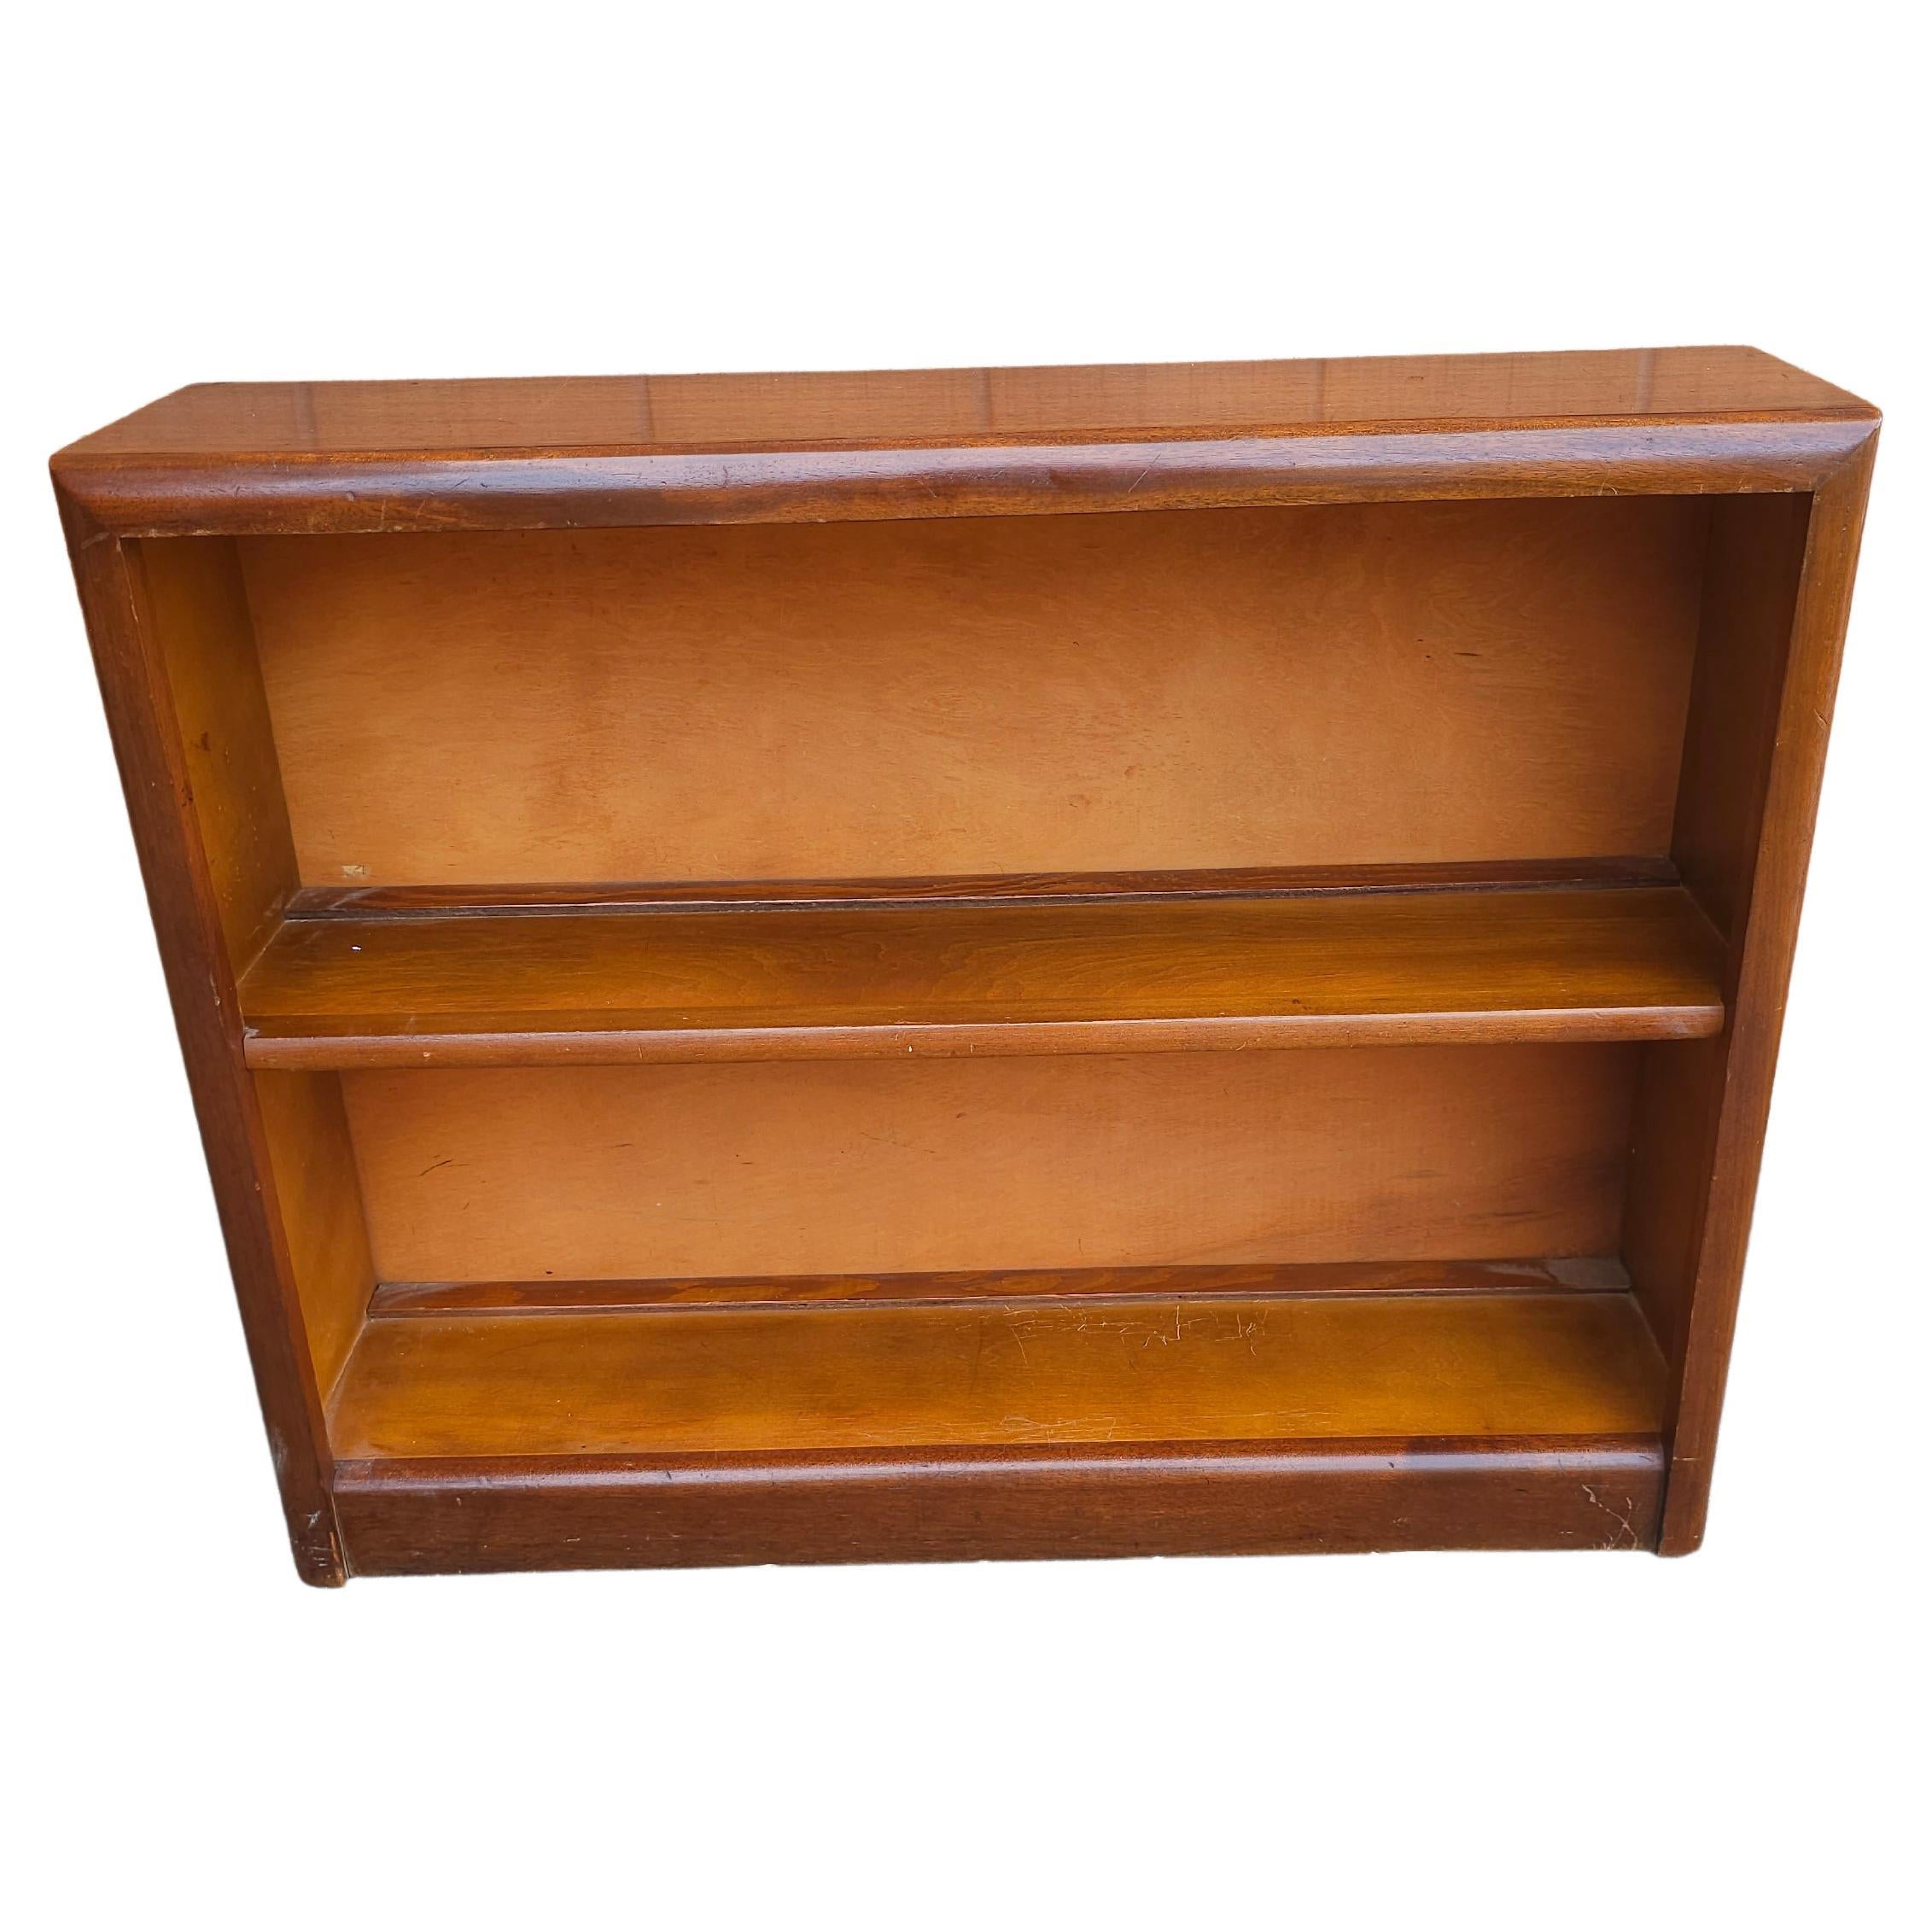 Mid-20th Century Solid Mahogany Encyclopedia Low Bookcase, Circa 1960s For Sale